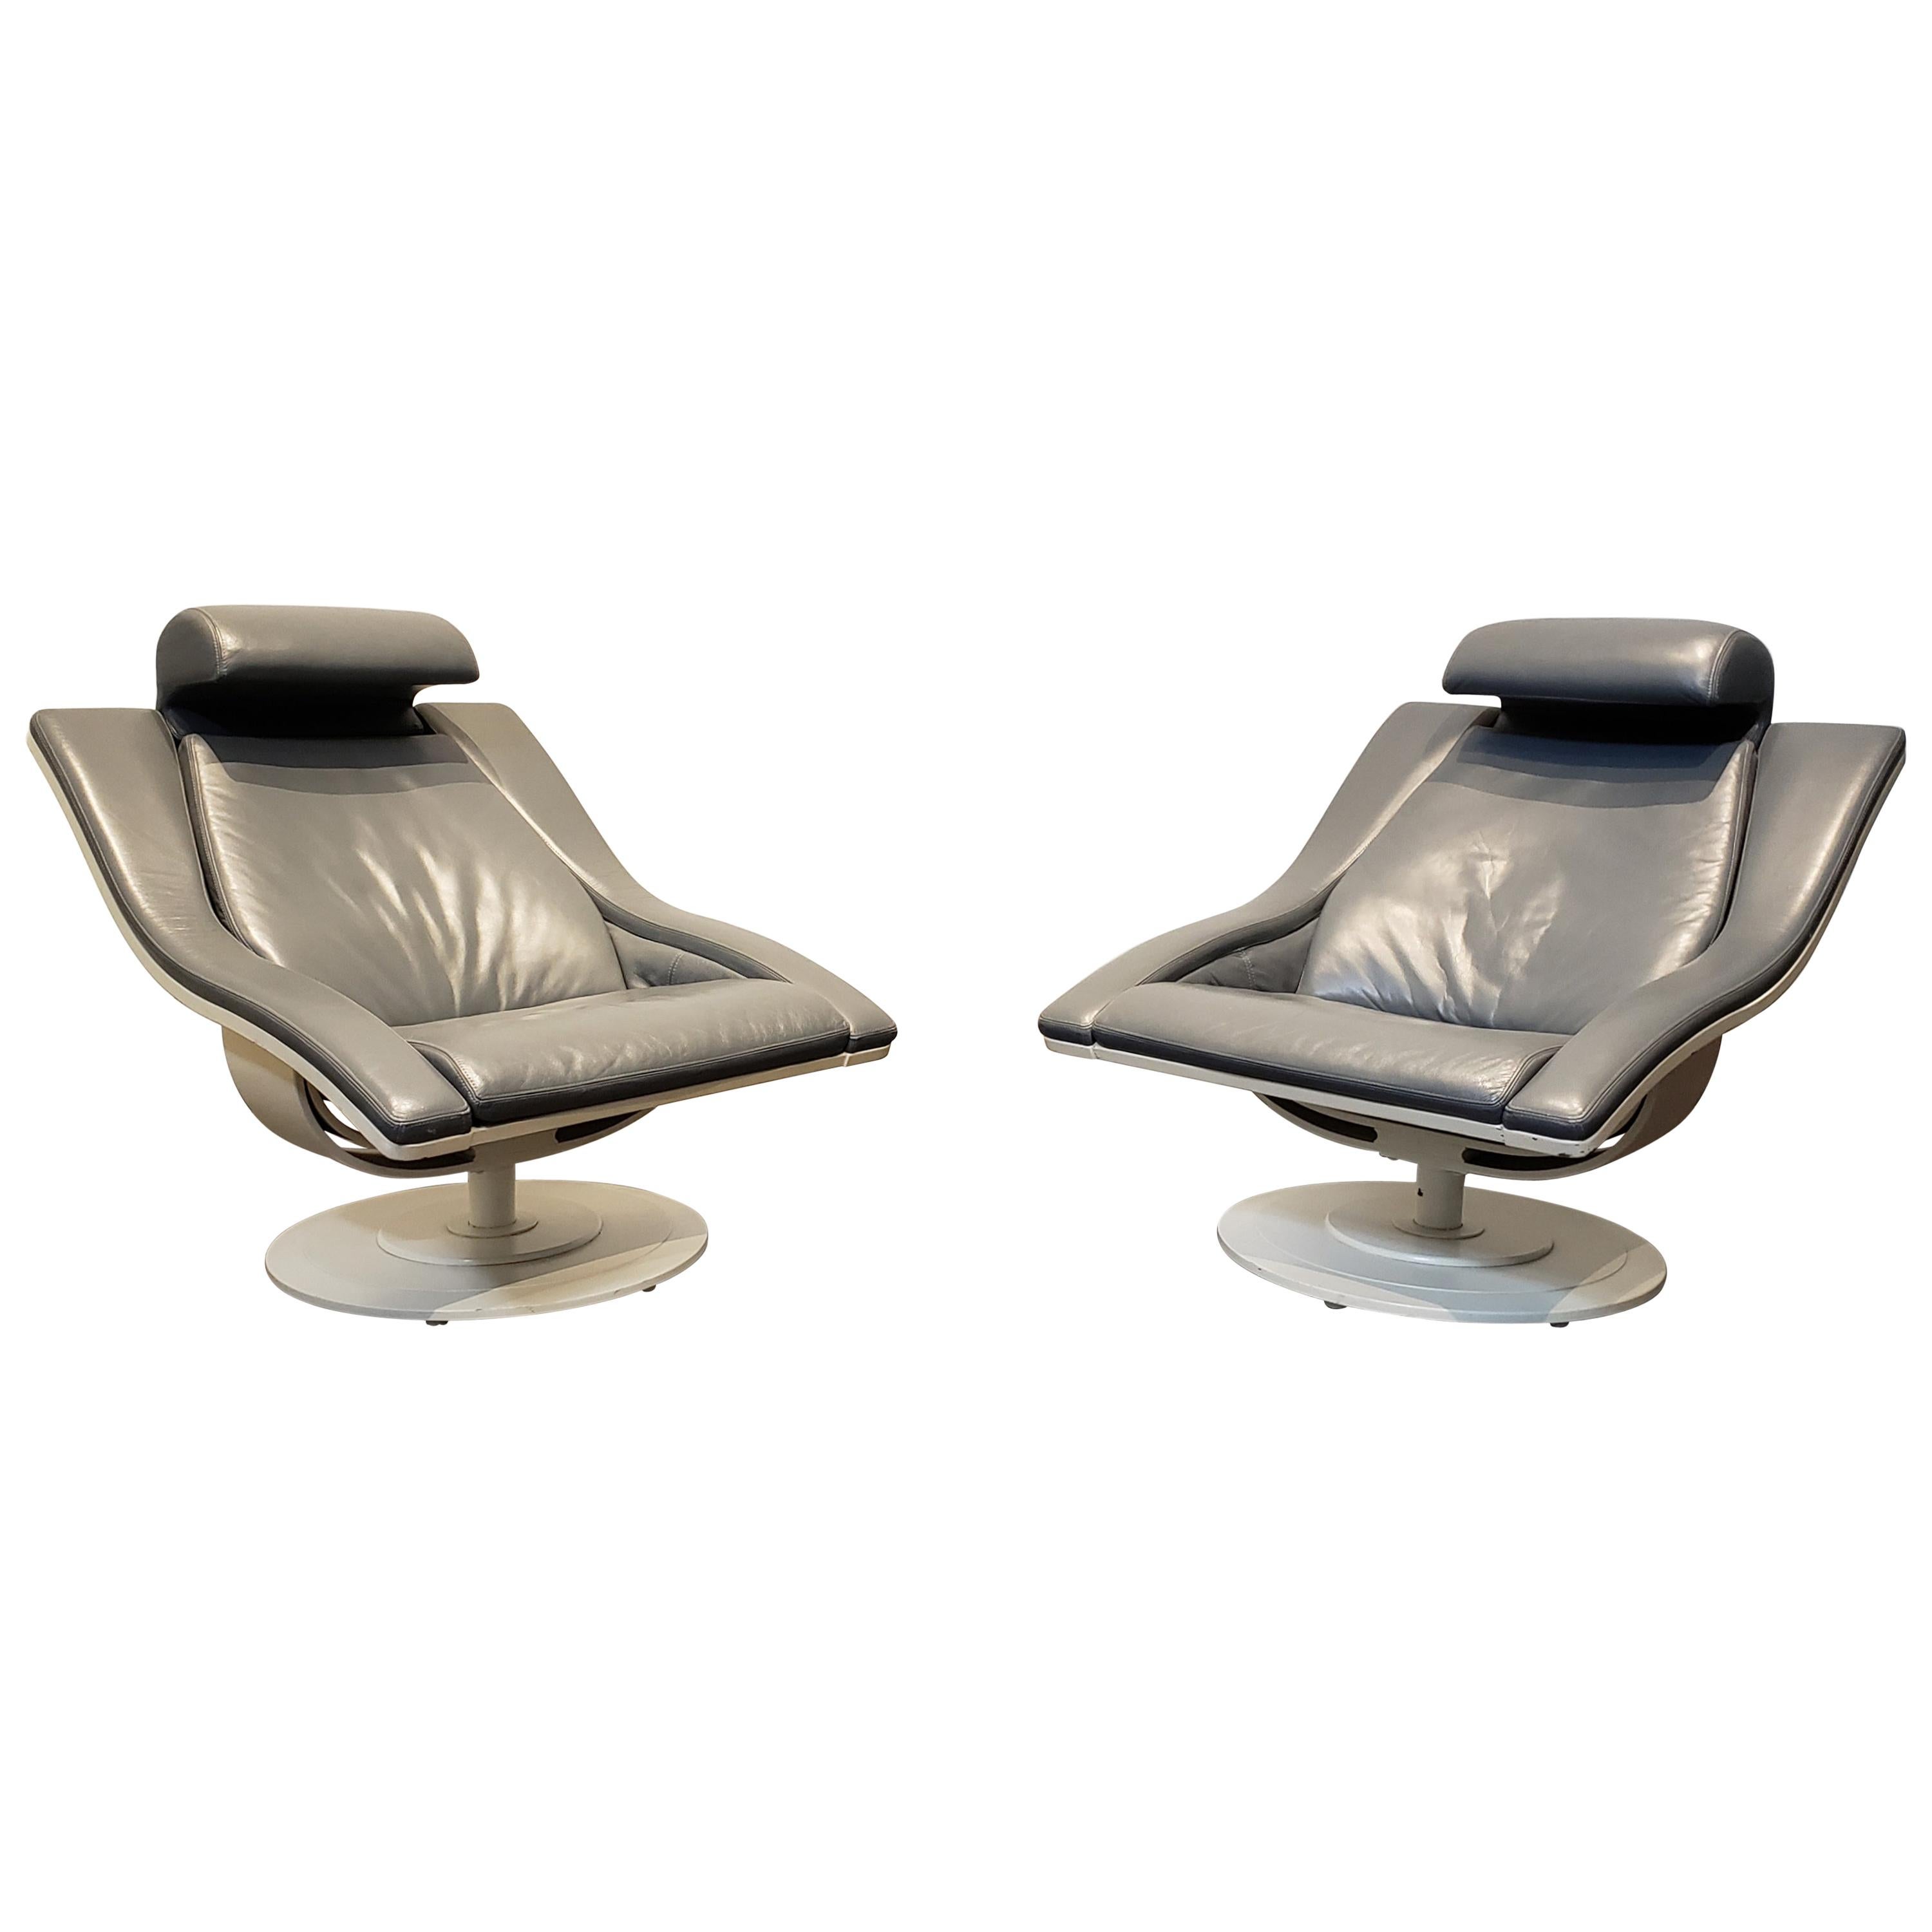 Pair of Structural Mid-Century Modern Leather Swivel Lounge Chairs For Sale